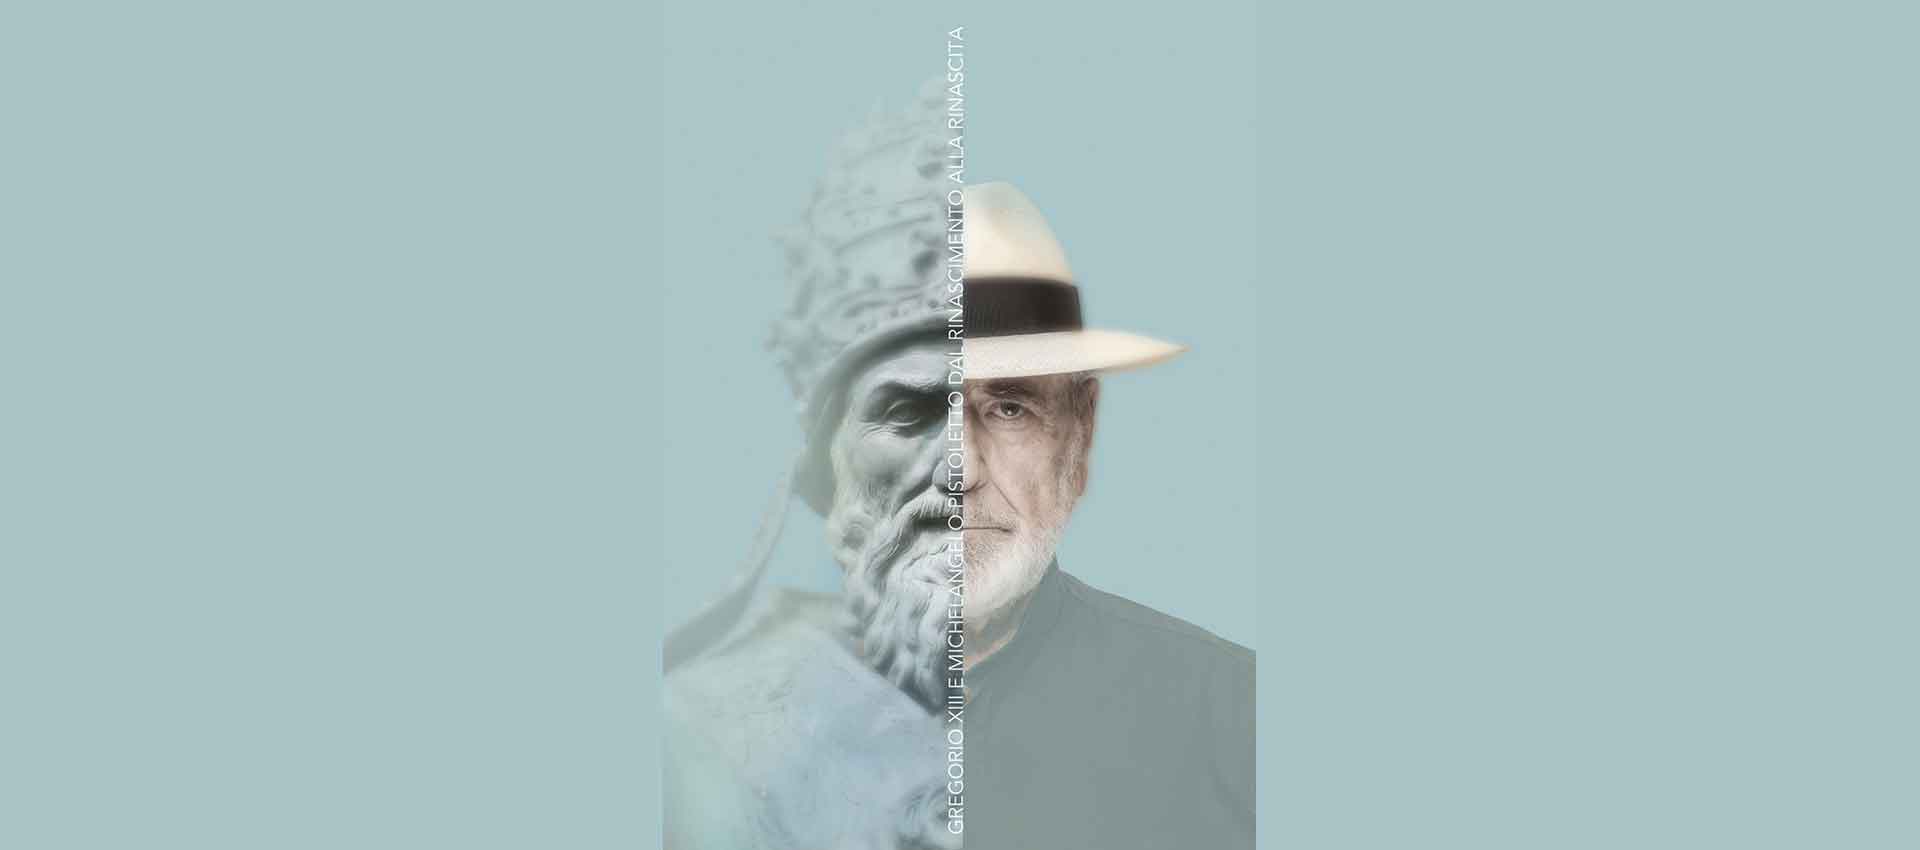 <p>May 7th &#8211; September 18th 2021</p>
<h2>From Gregory XIII<br />
to Michelangelo Pistoletto<br />
</h2>
<h3>From the Renaissance to the Rebirth<br />
</h3>
